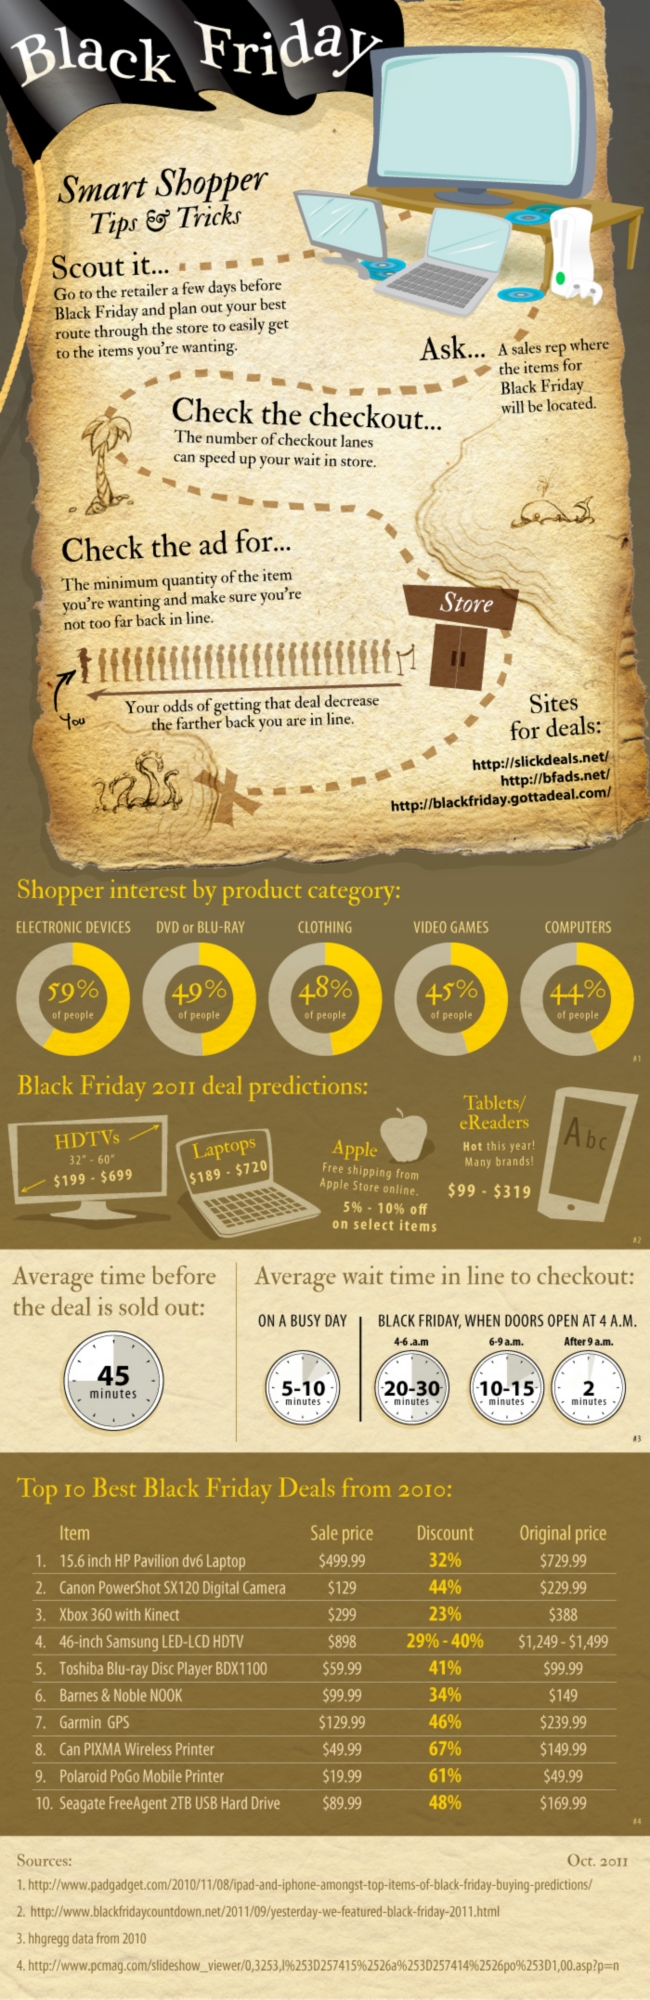 Black Friday Smart Shopper Tips and Tricks brought to you by hhgregg